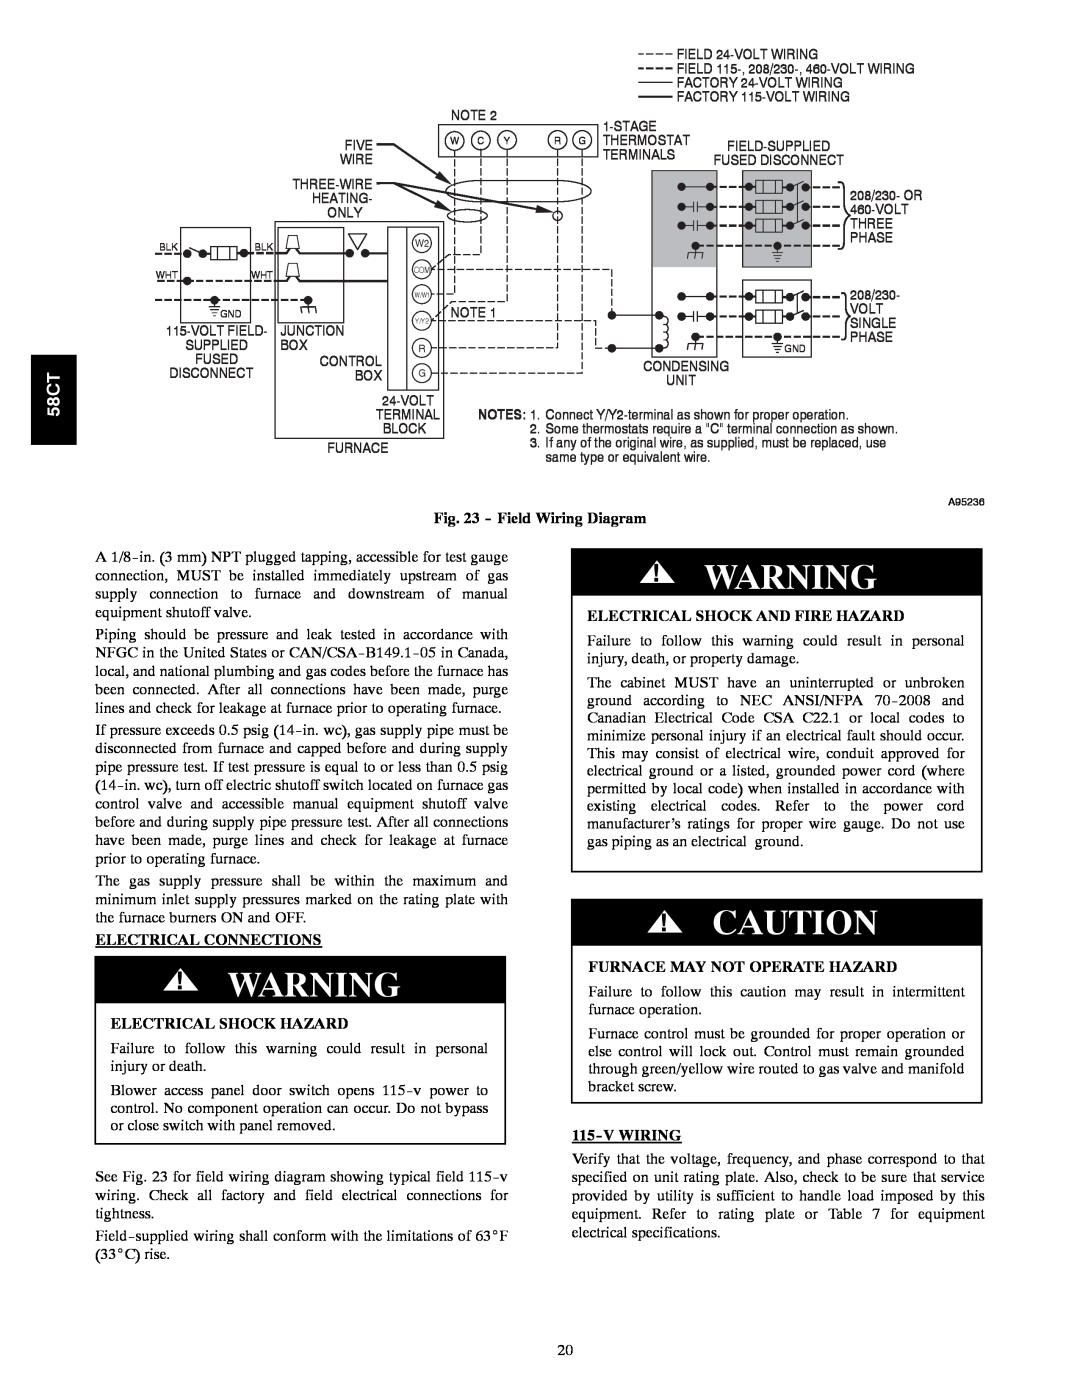 Carrier 58CTA/CTX Field Wiring Diagram, Electrical Connections, Electrical Shock Hazard, Electrical Shock And Fire Hazard 